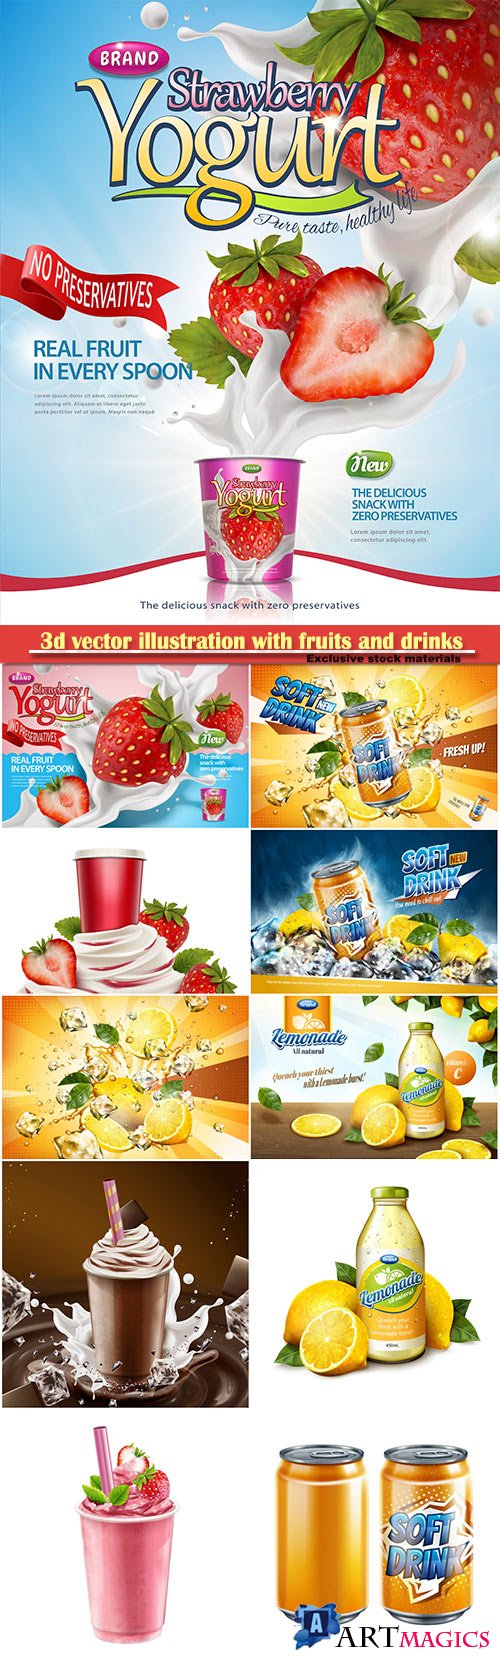 3d vector illustration with fruits and drinks